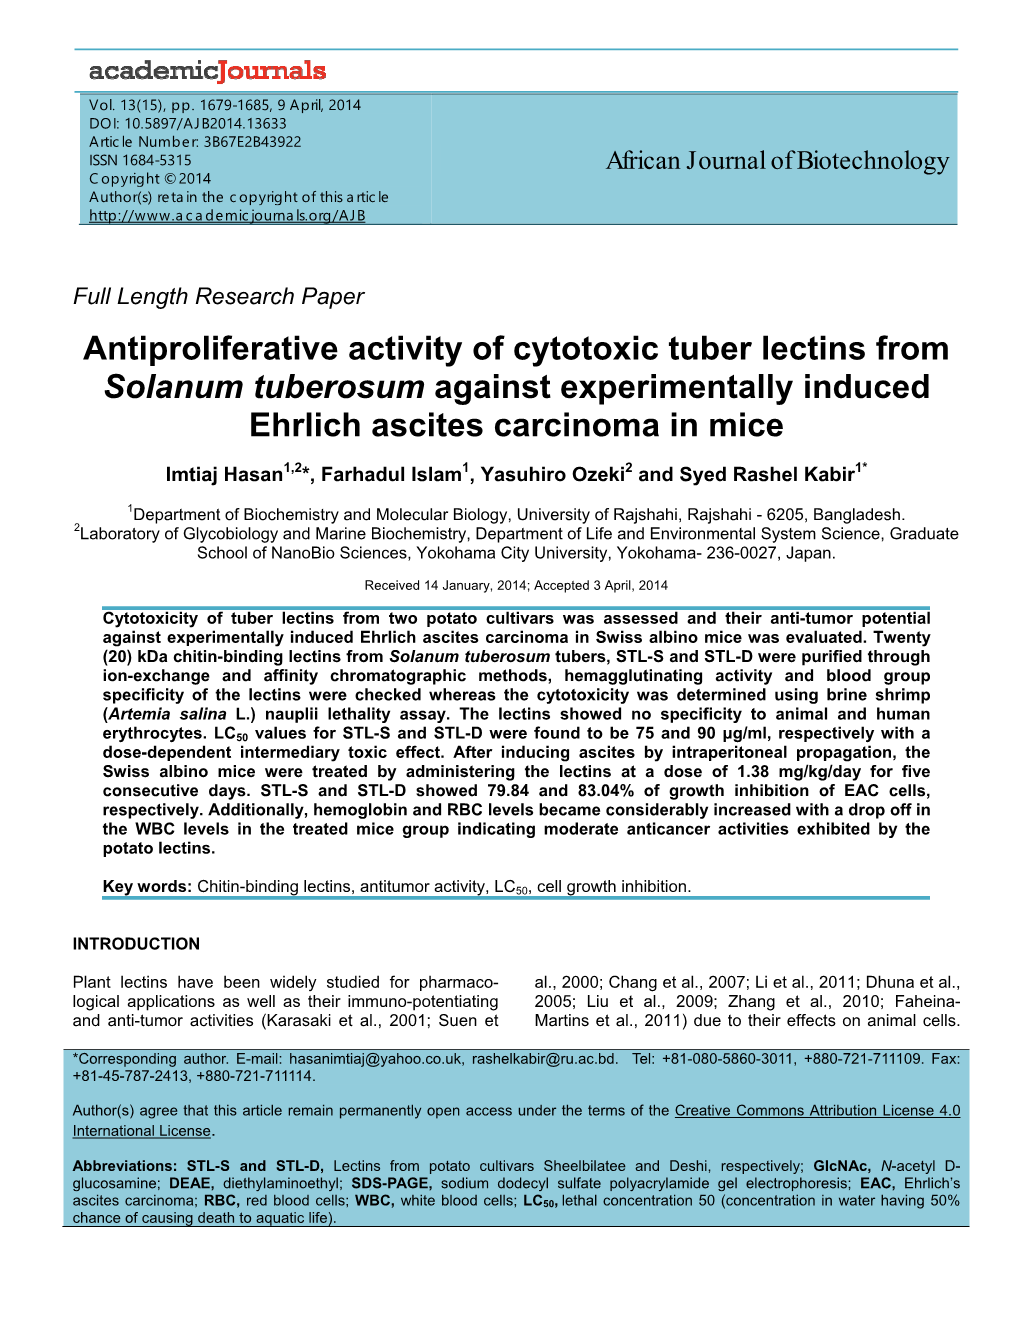 Antiproliferative Activity of Cytotoxic Tuber Lectins from Solanum Tuberosum Against Experimentally Induced Ehrlich Ascites Carcinoma in Mice